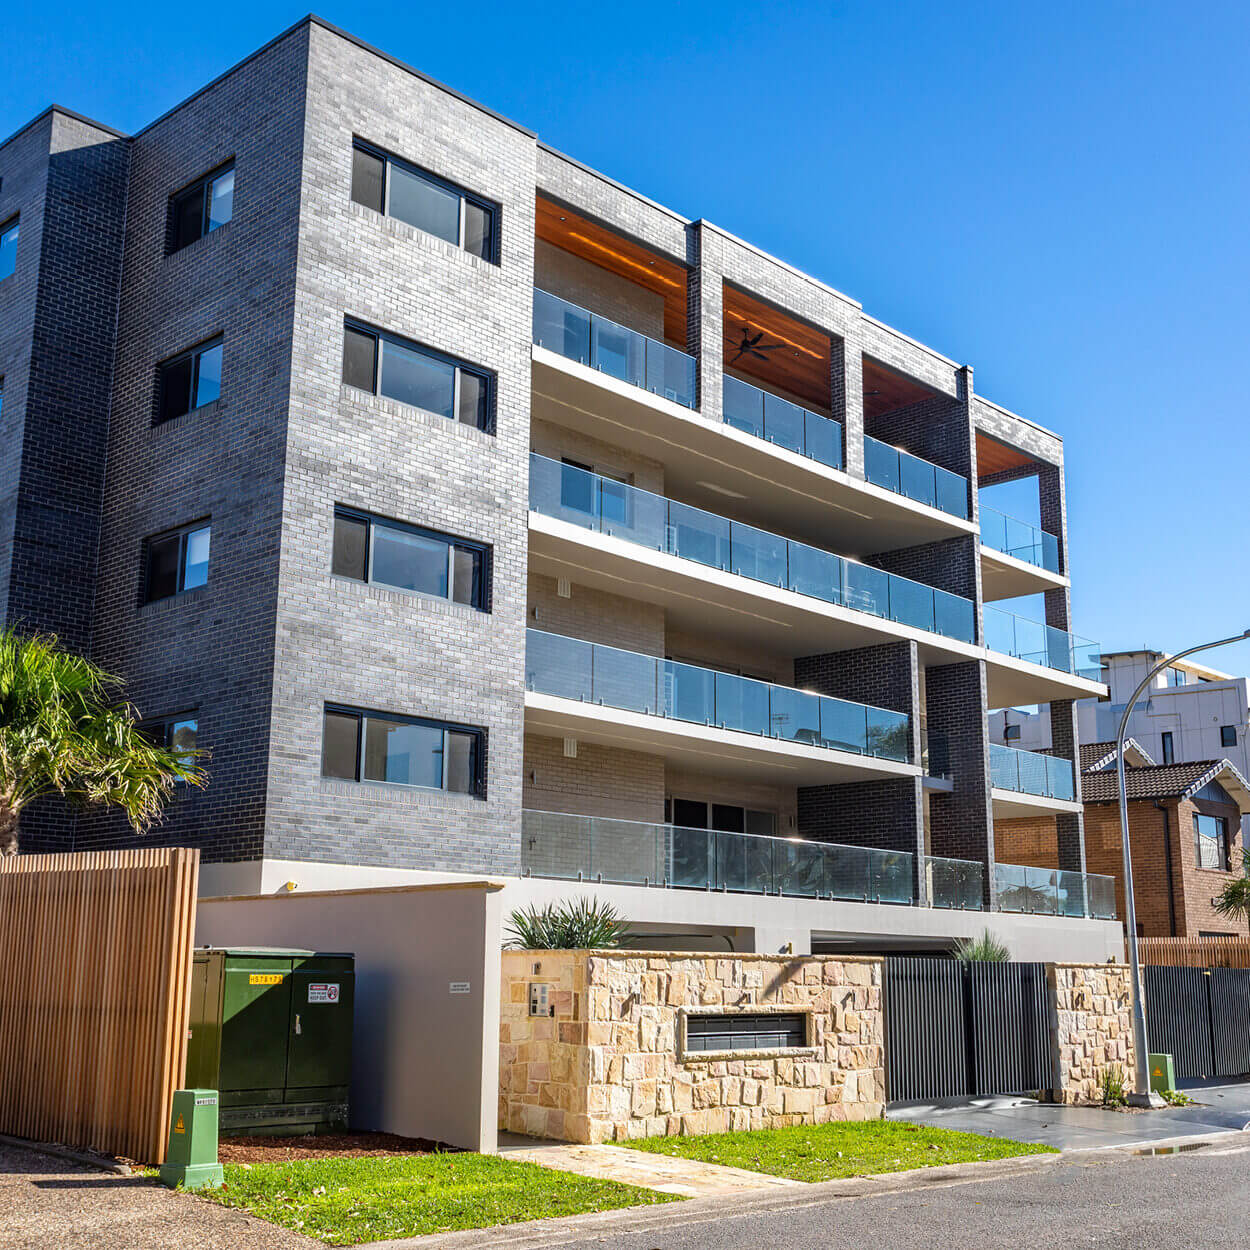 Modern multi-story residential building in Nelson Bay with a mix of stone and dark gray brick facade, featuring large balconies with glass railings and wood paneling under a clear blue sky.